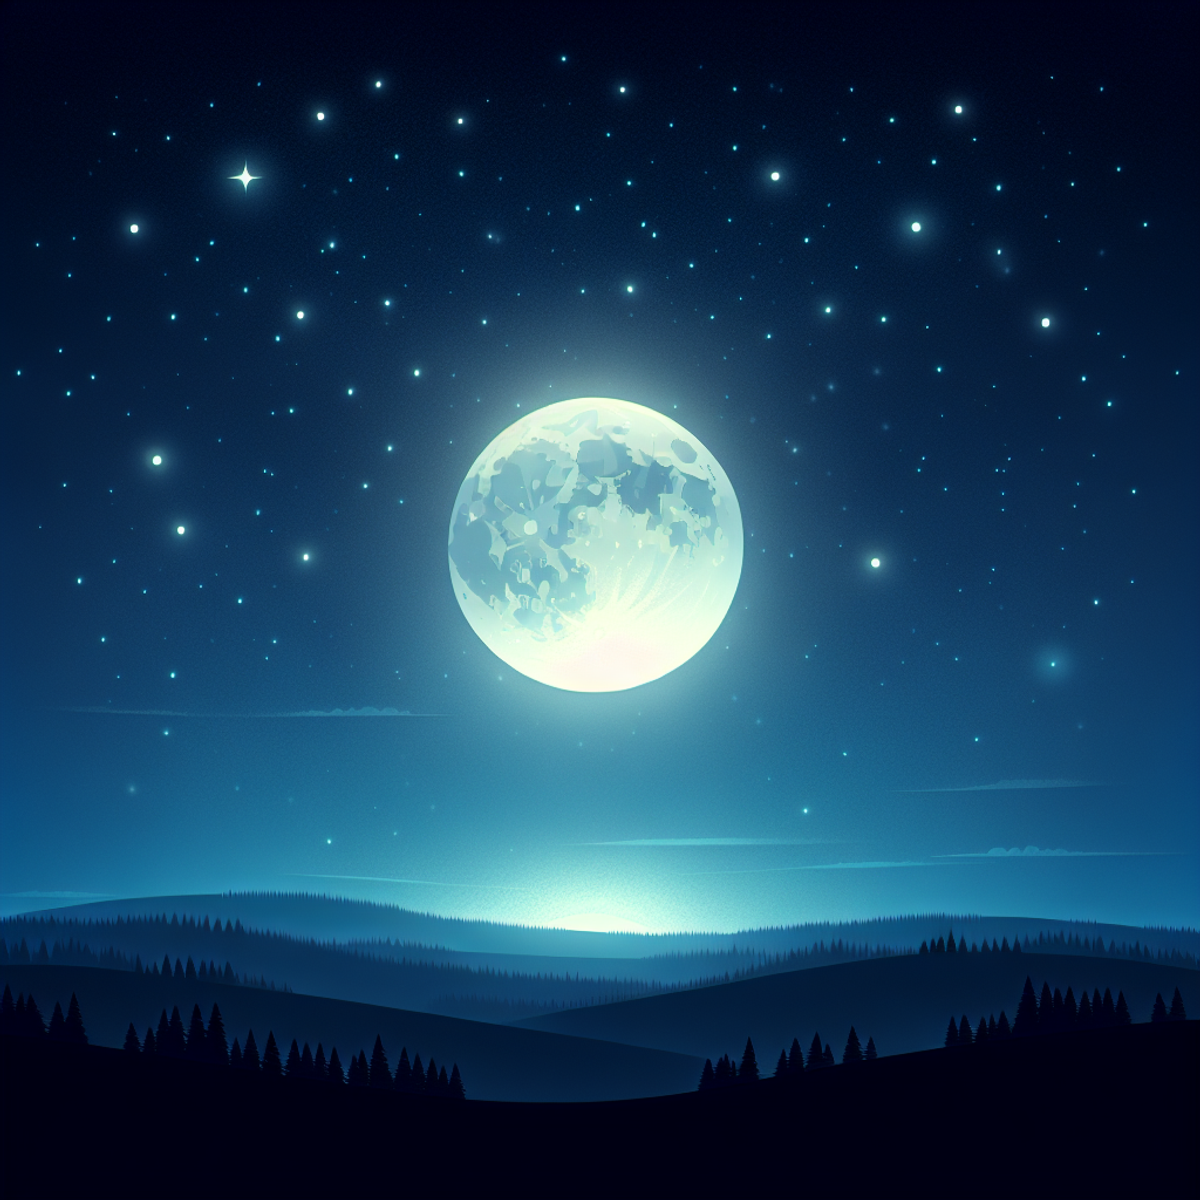 A serene night sky with a full moon and twinkling stars.